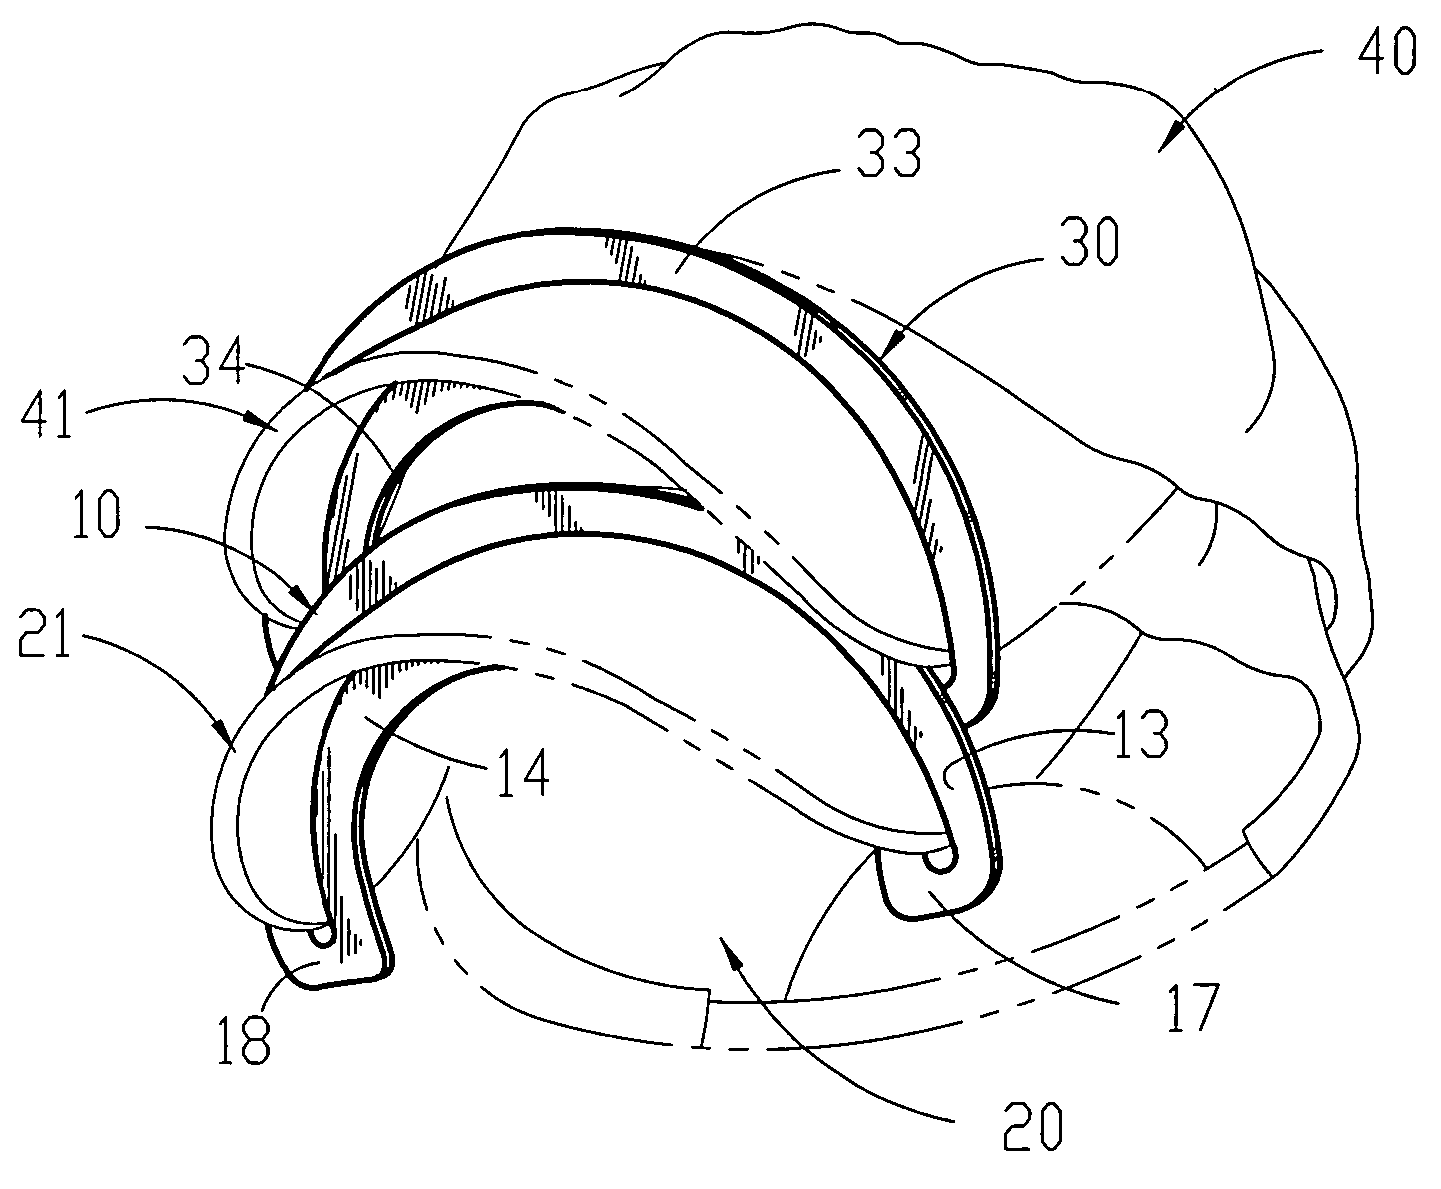 Athletic headwear shaping device and method